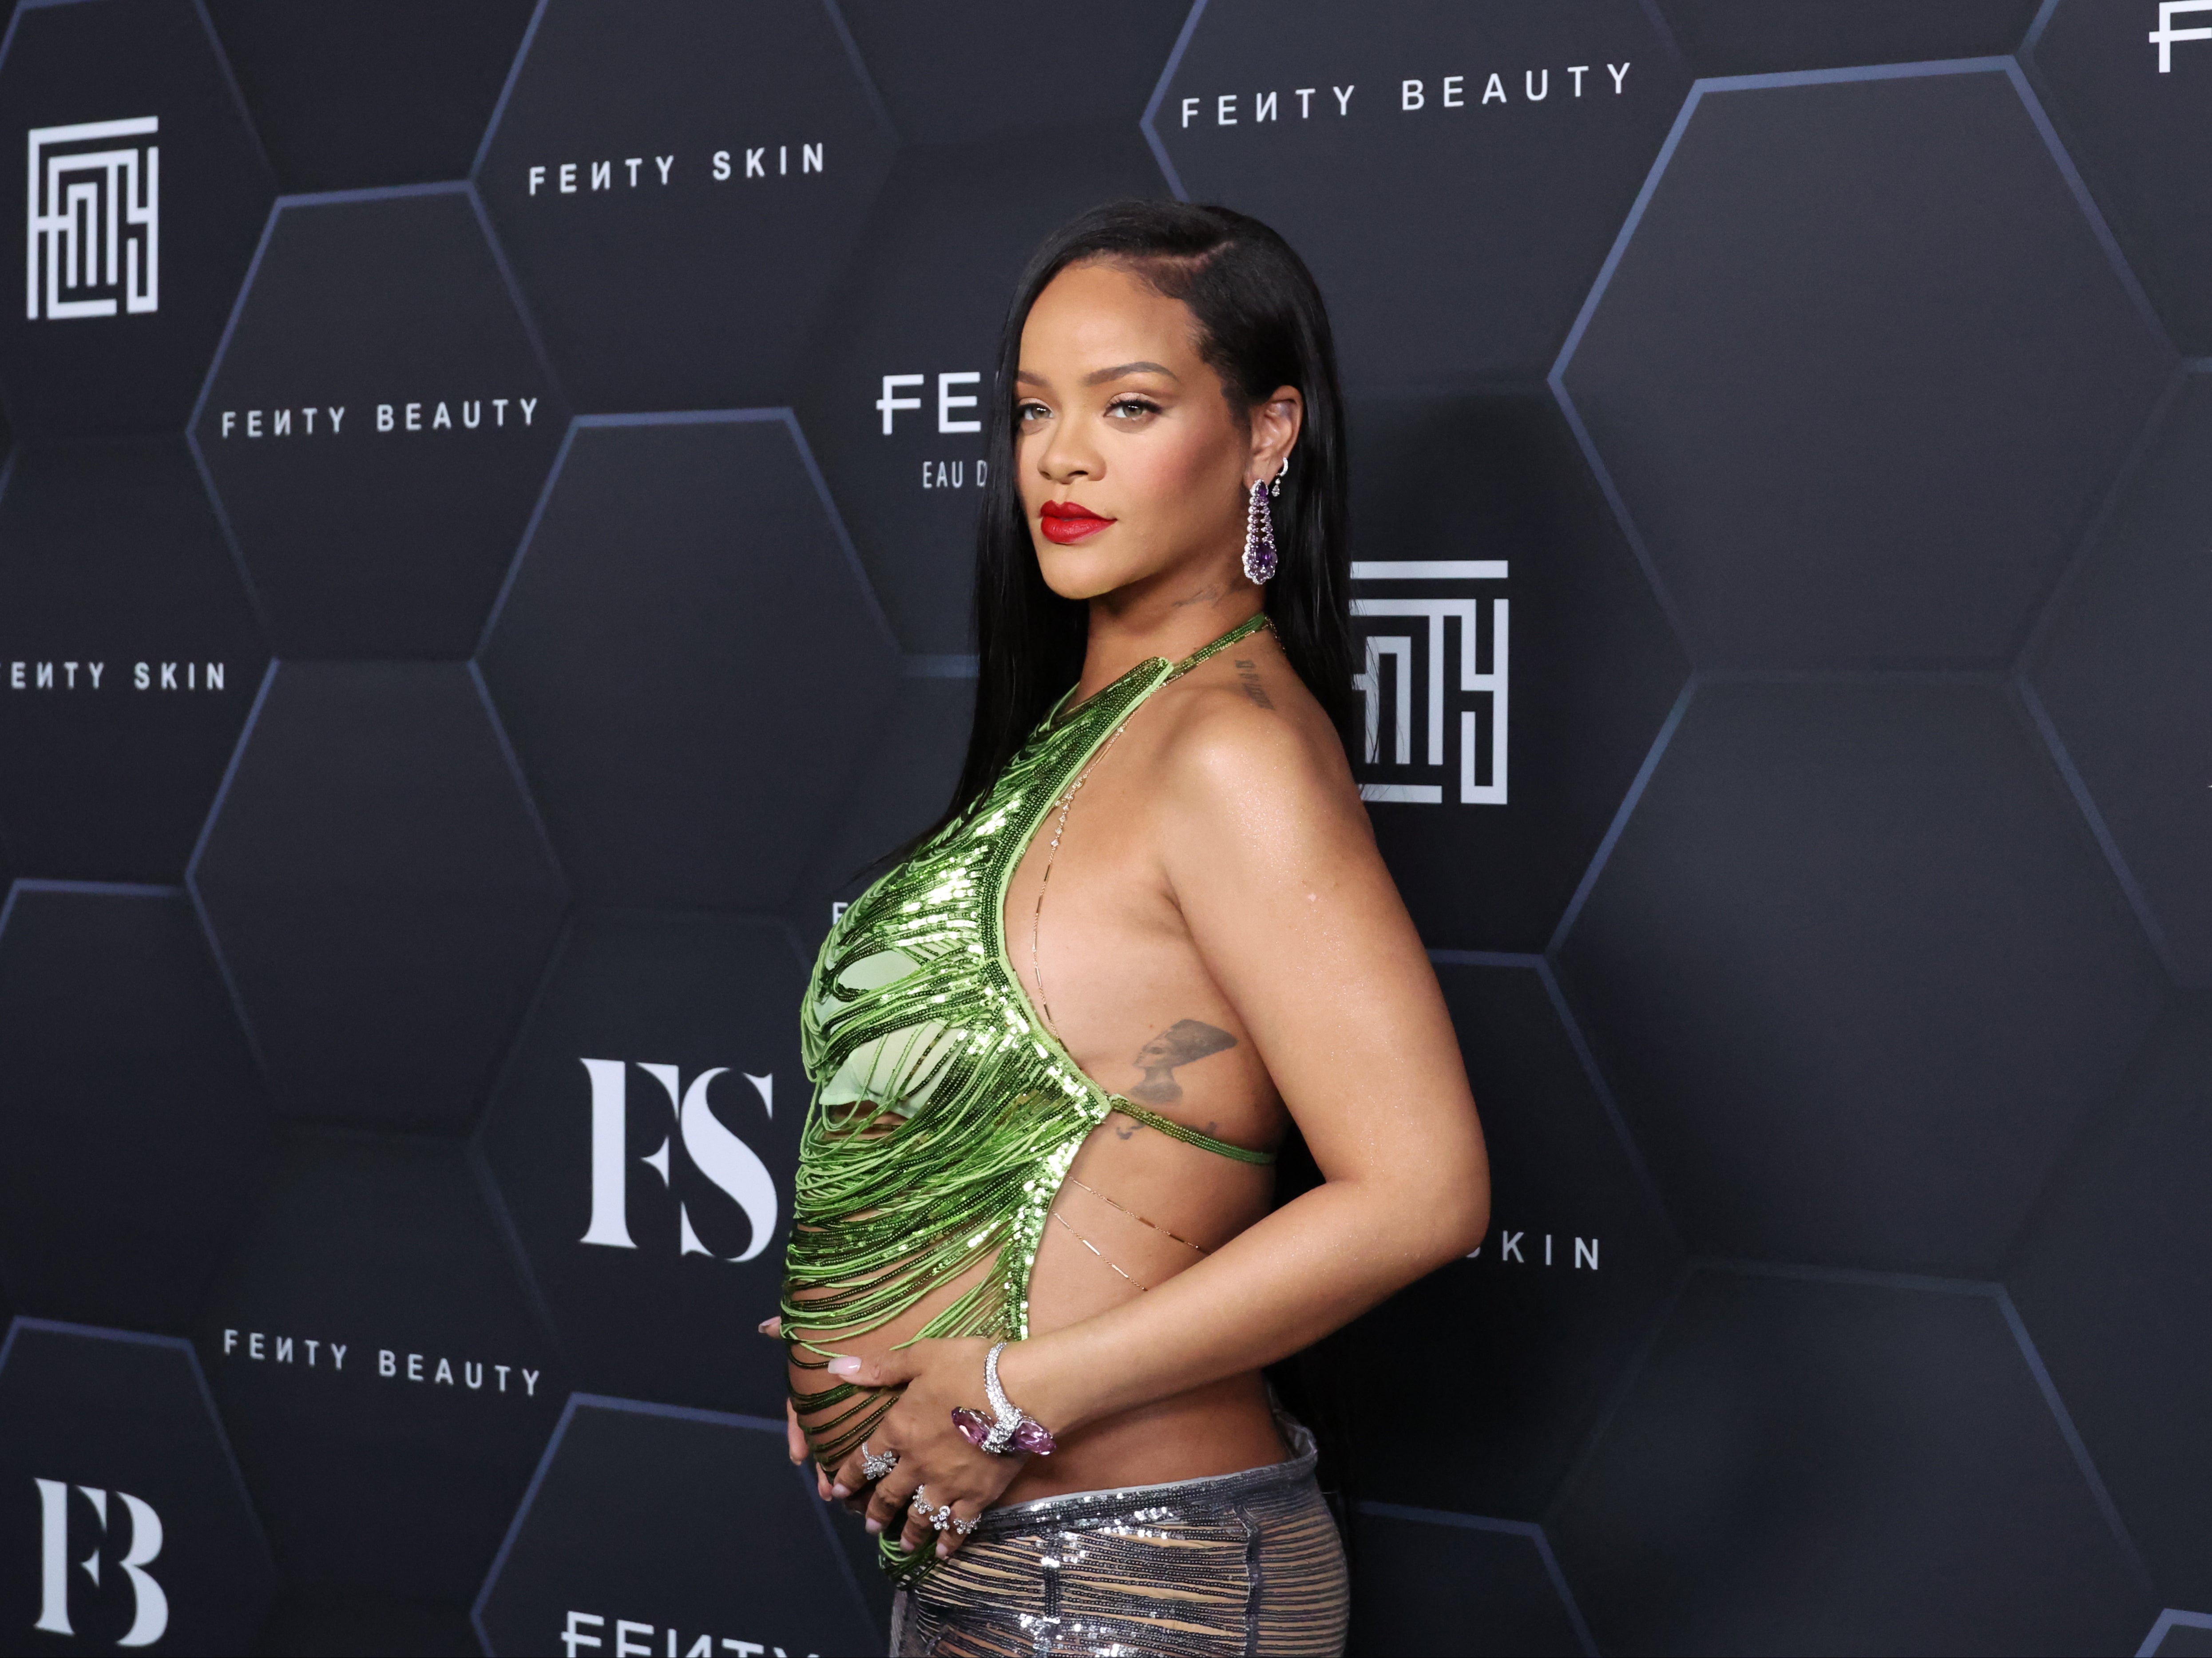 Rihanna reveals she forgets she is pregnant sometimes